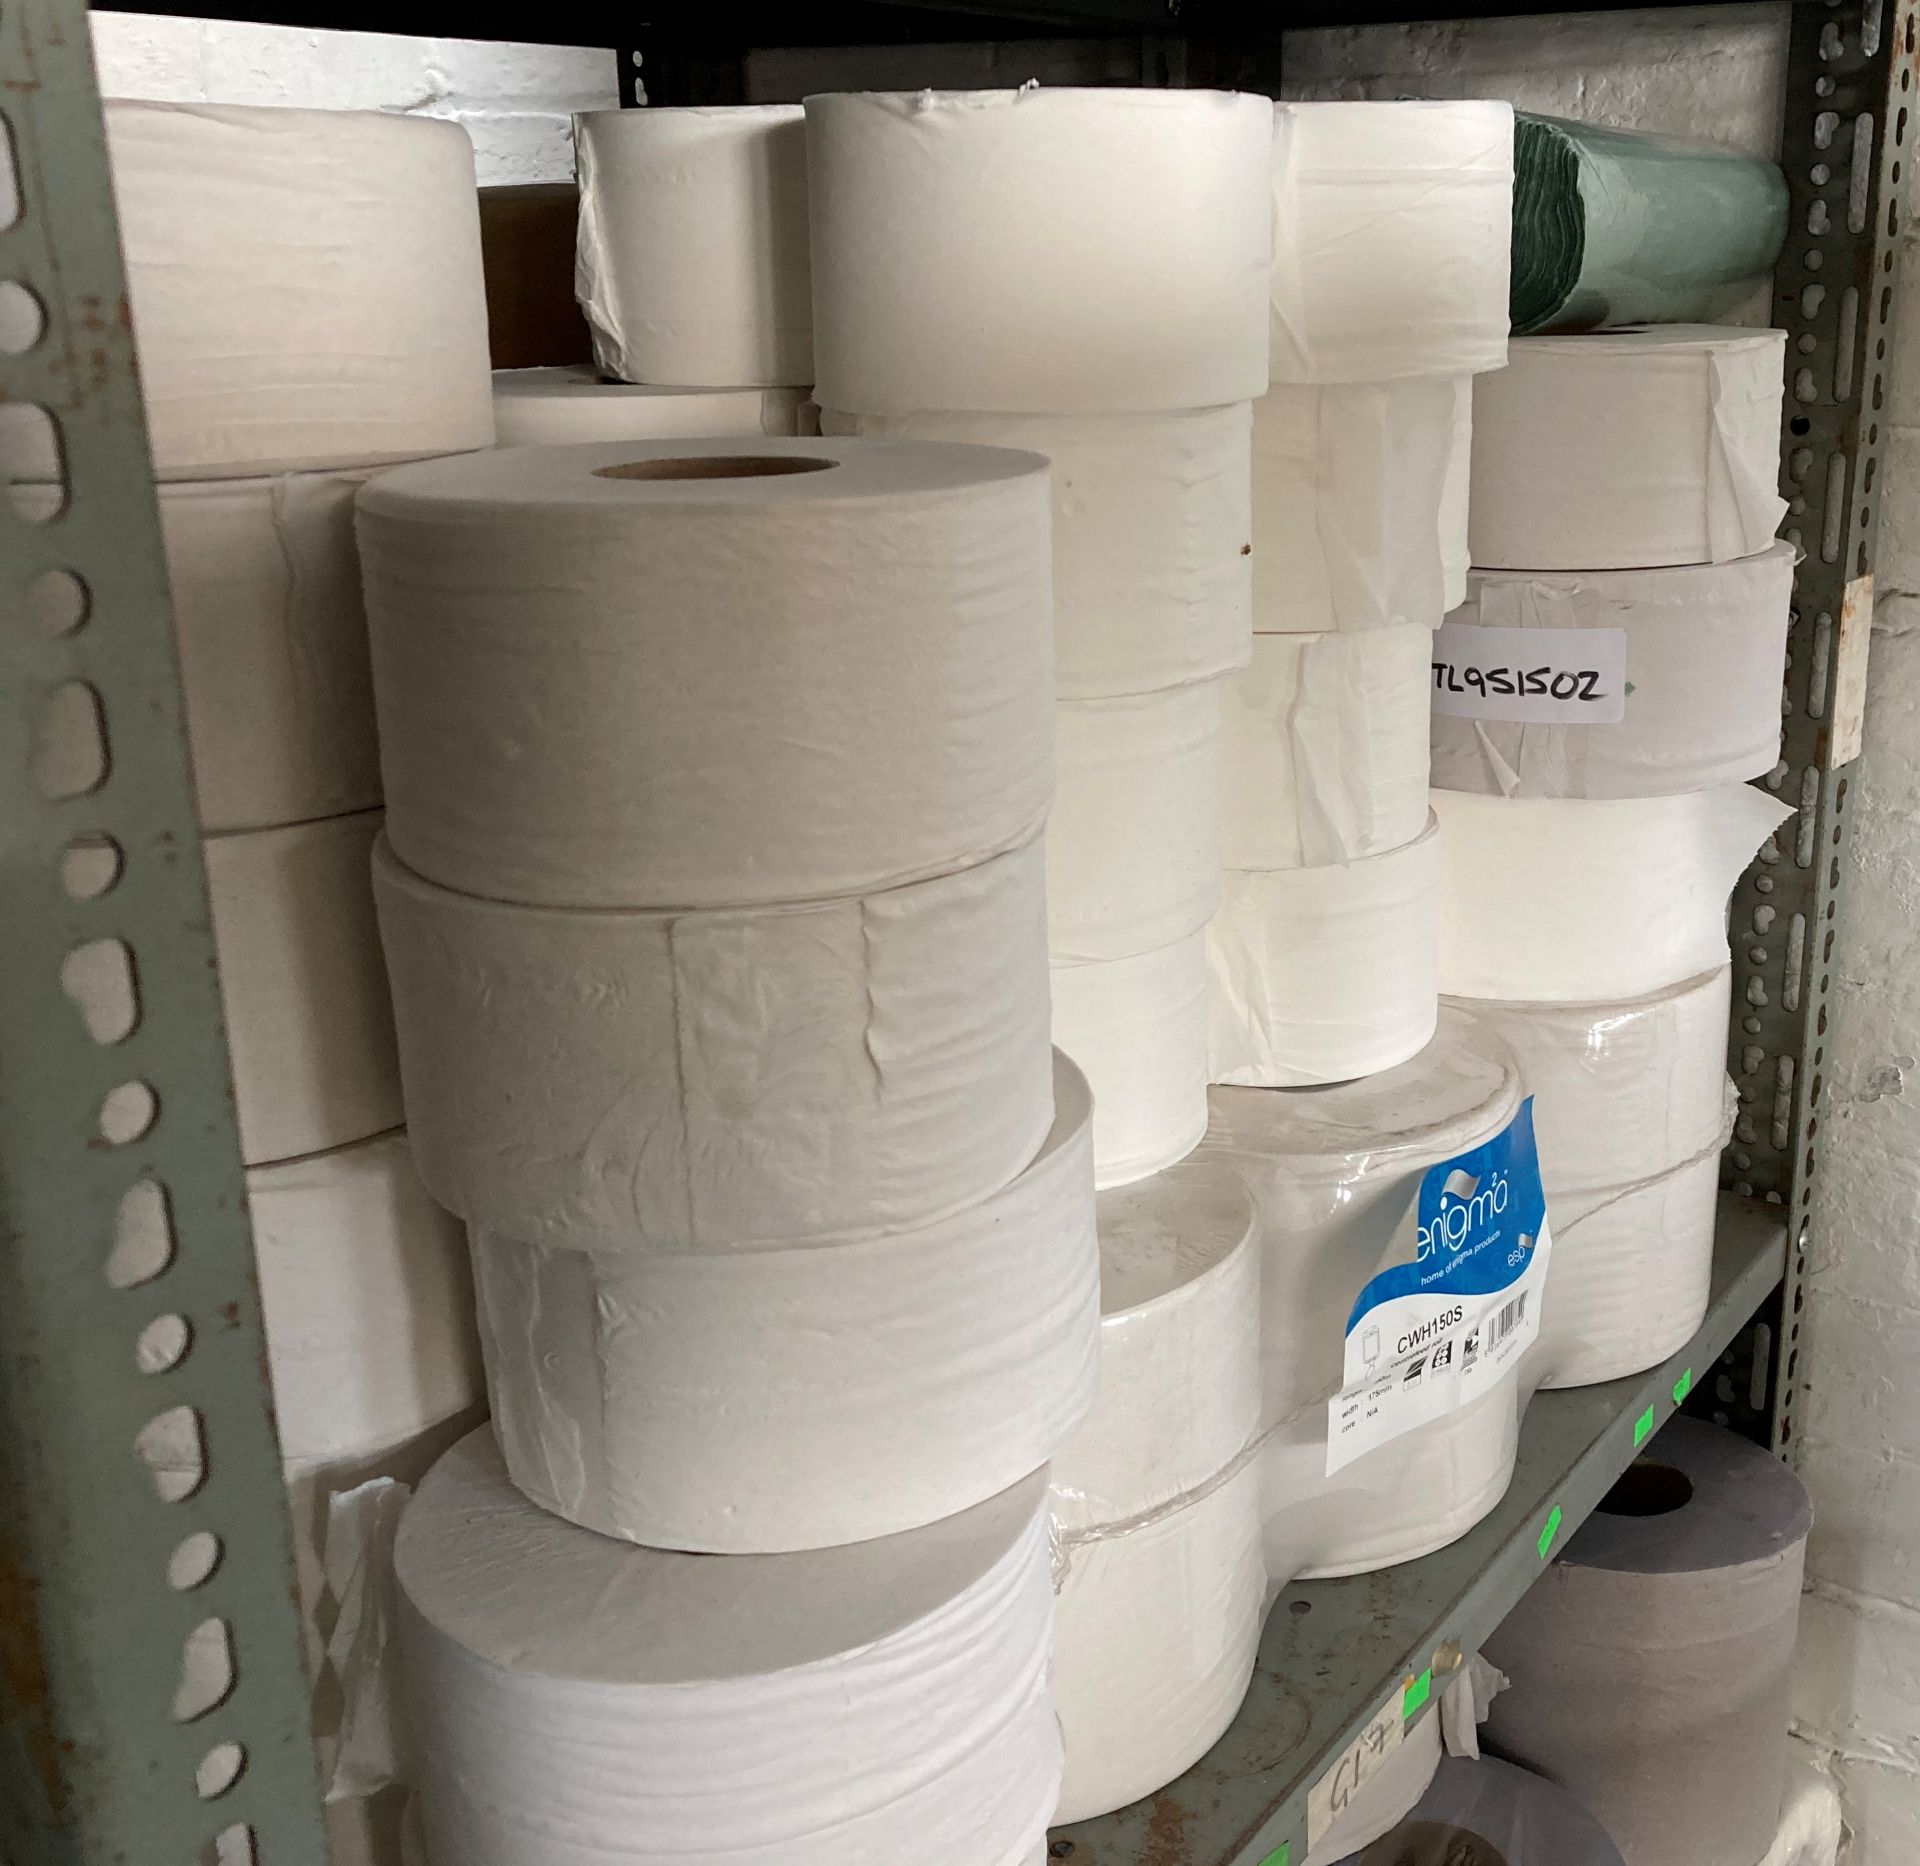 Contents to three bays - a quantity of Resource wiper rolls, - Image 3 of 4